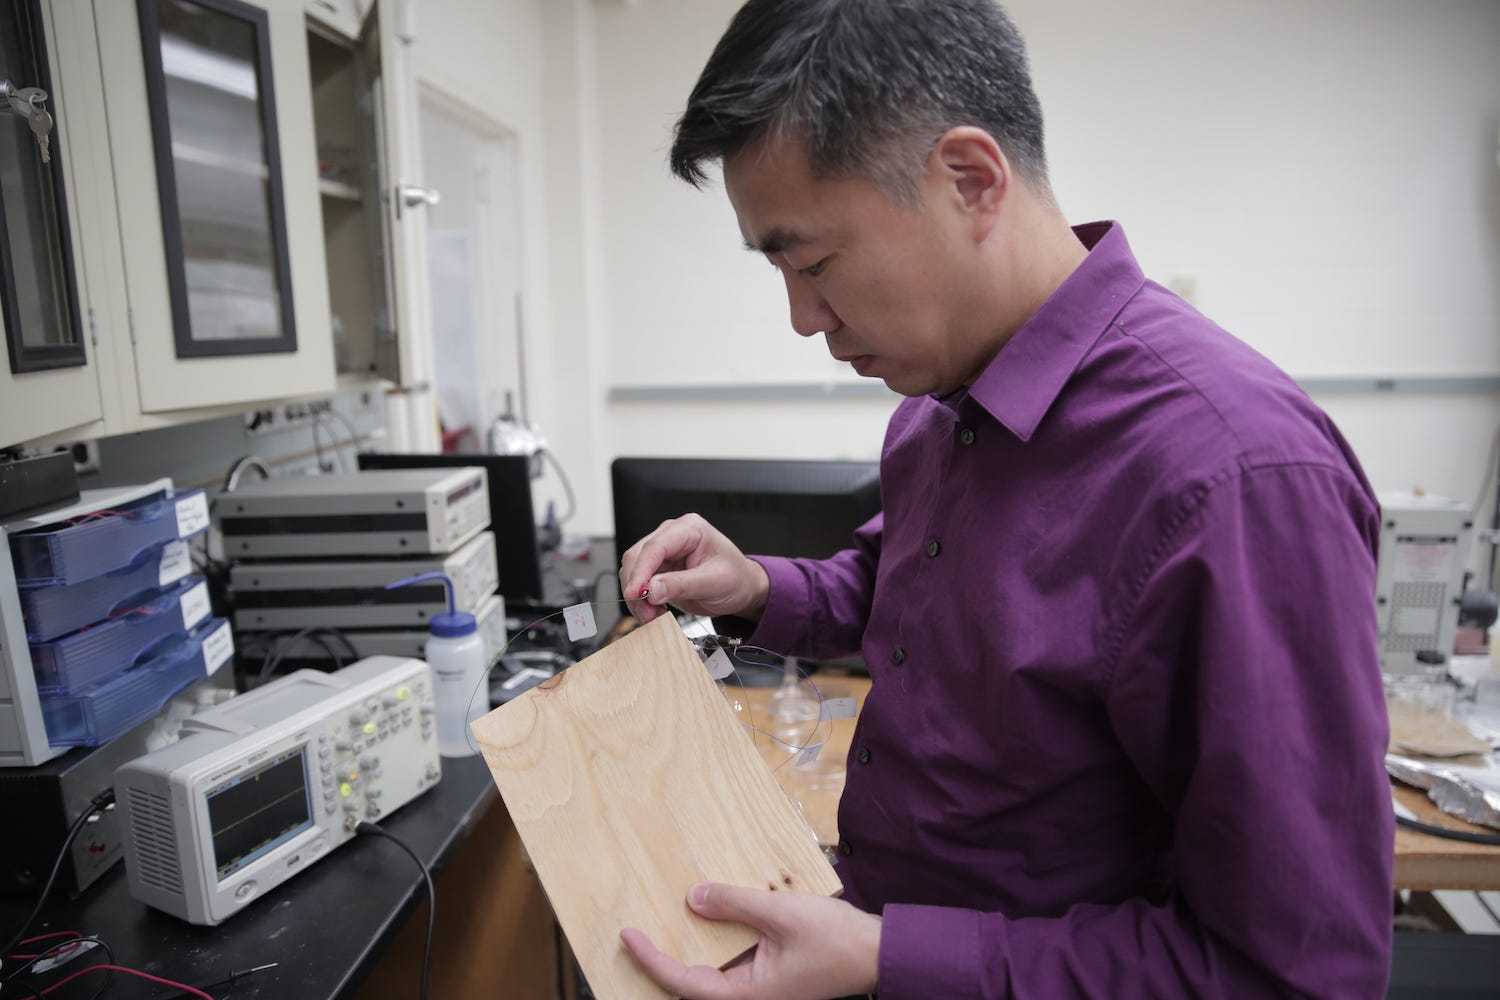 An Asian scientist in a purple shirt examines a piece of flooring material.